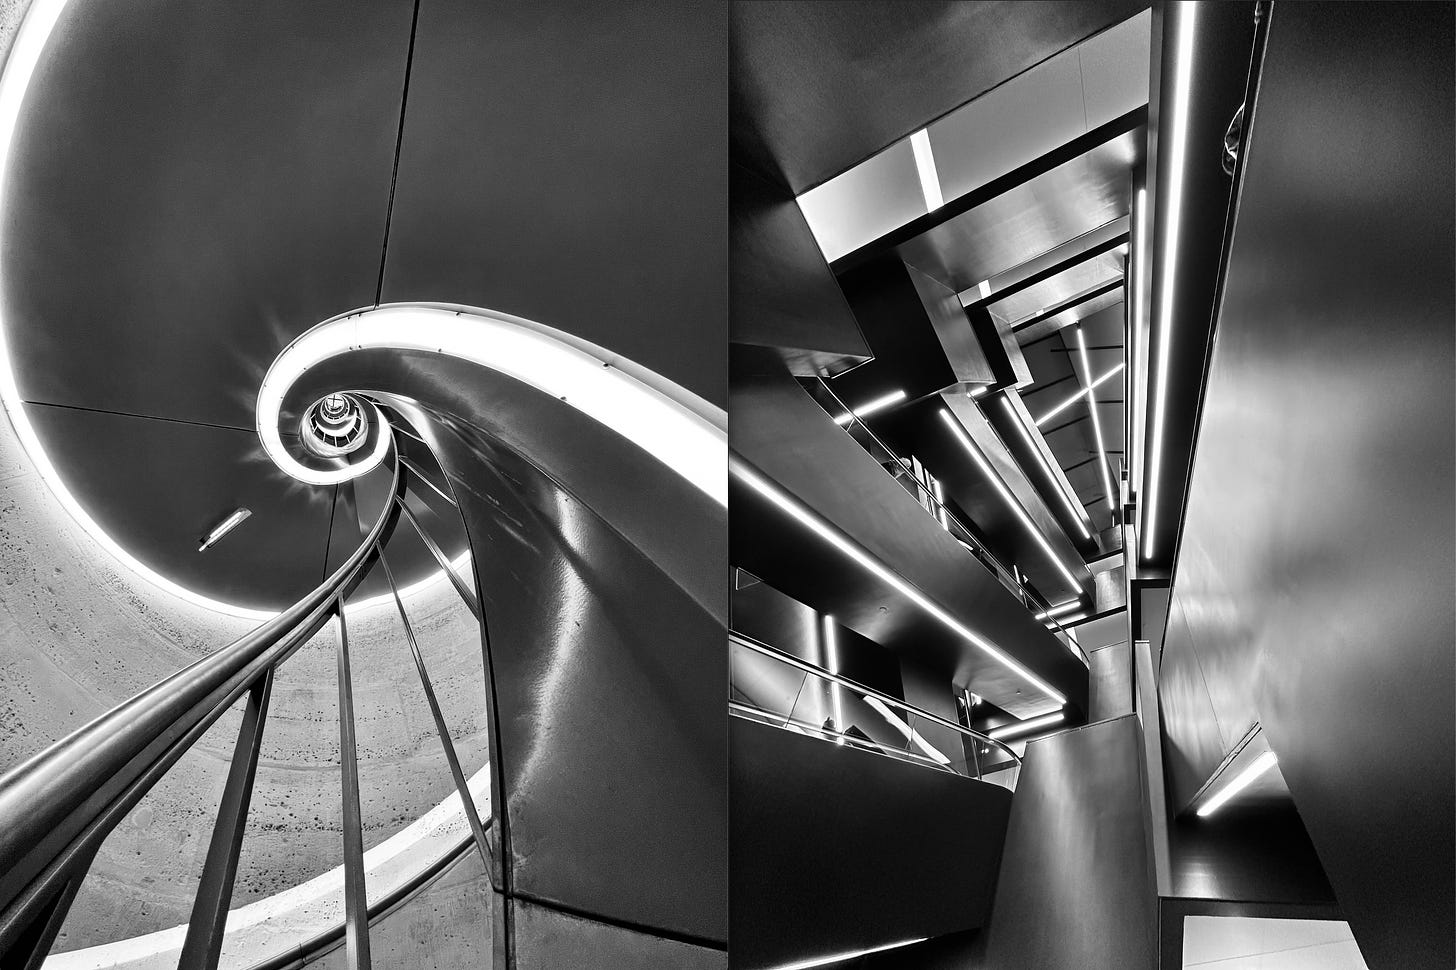 Per ChatGPT: This image is a black and white photograph split into two contrasting sections. On the left side, there's a spiral staircase viewed from the bottom up, leading to a vanishing point at the top center of the frame, emphasizing its circular architecture and the elegant curves of the handrails. Light fixtures are visible along the inner curve of the staircase, casting a soft glow on the surrounding walls. The right side of the image showcases a modern interior with geometric, angular features, and a series of horizontal and vertical lines created by illuminated panels and edges. The lighting creates a play of light and shadow that highlights the sleek, metallic surfaces and sharp angles of the design. Both halves of the image explore the beauty of architectural forms through the use of light, shadow, and perspective.